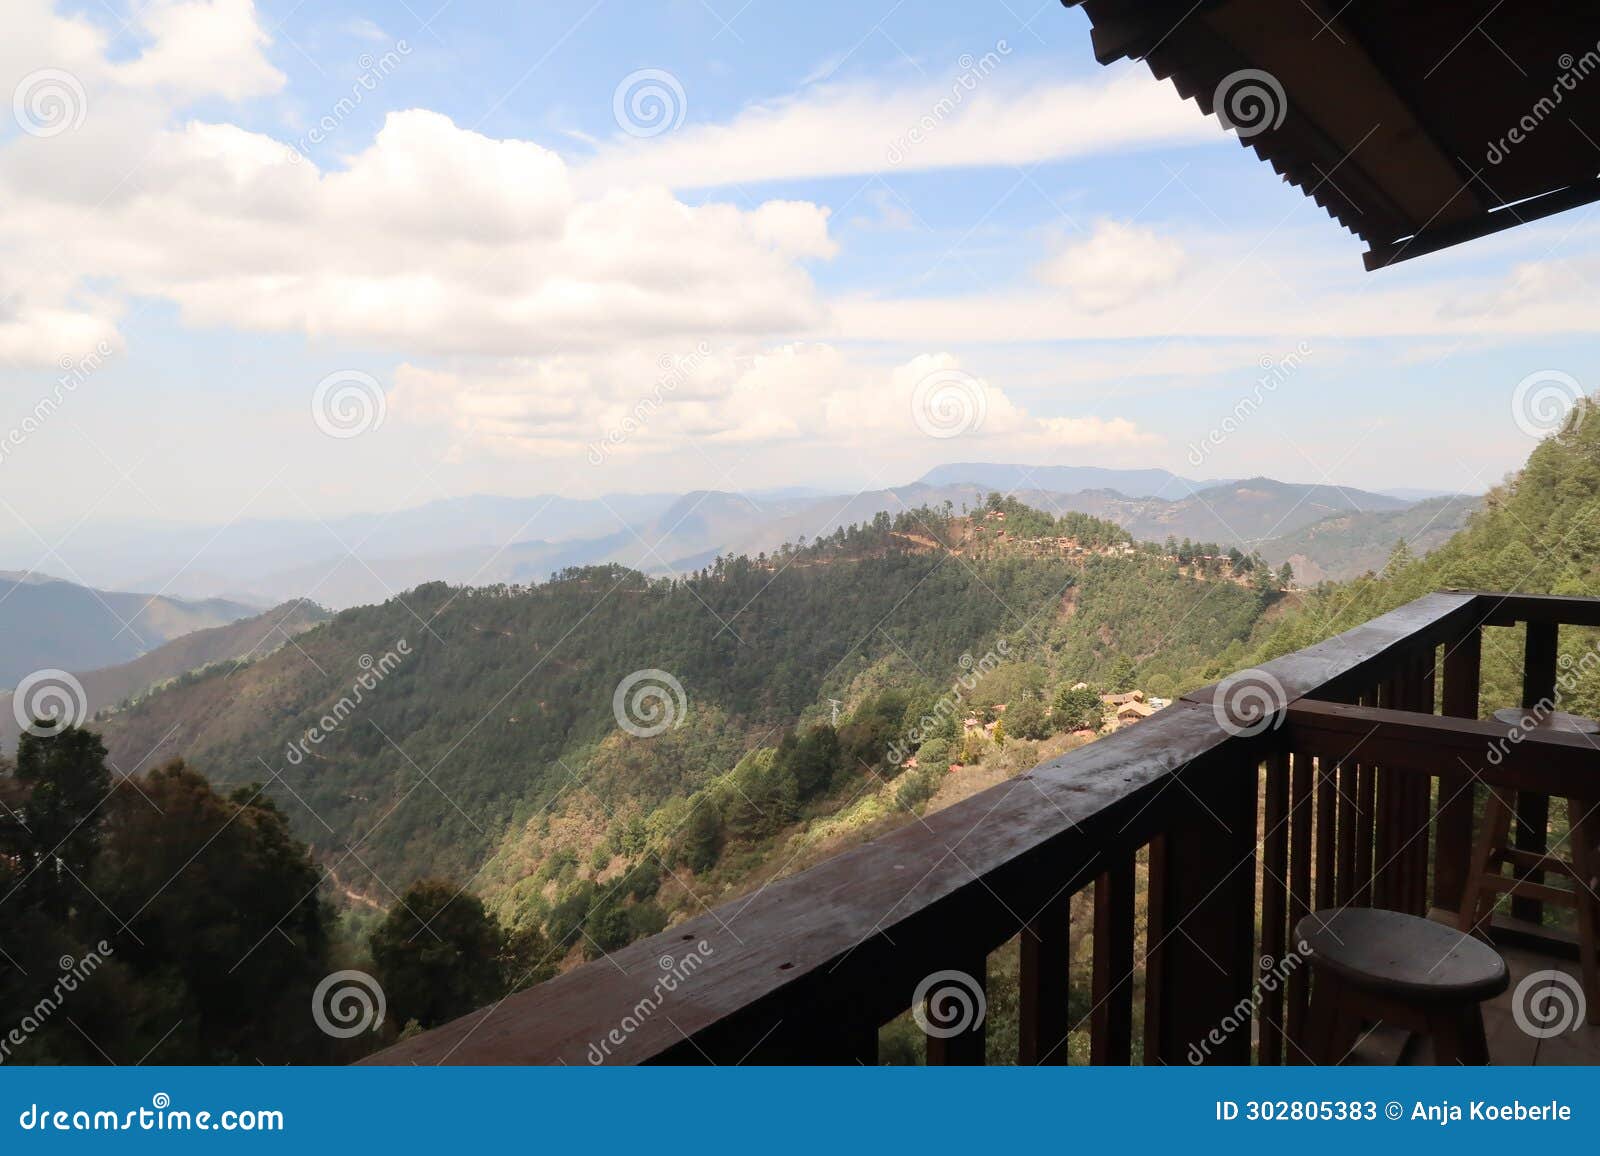 view from a wooden balcony onto the hilly landscape of san jose del pacifico, oaxaca, mexico